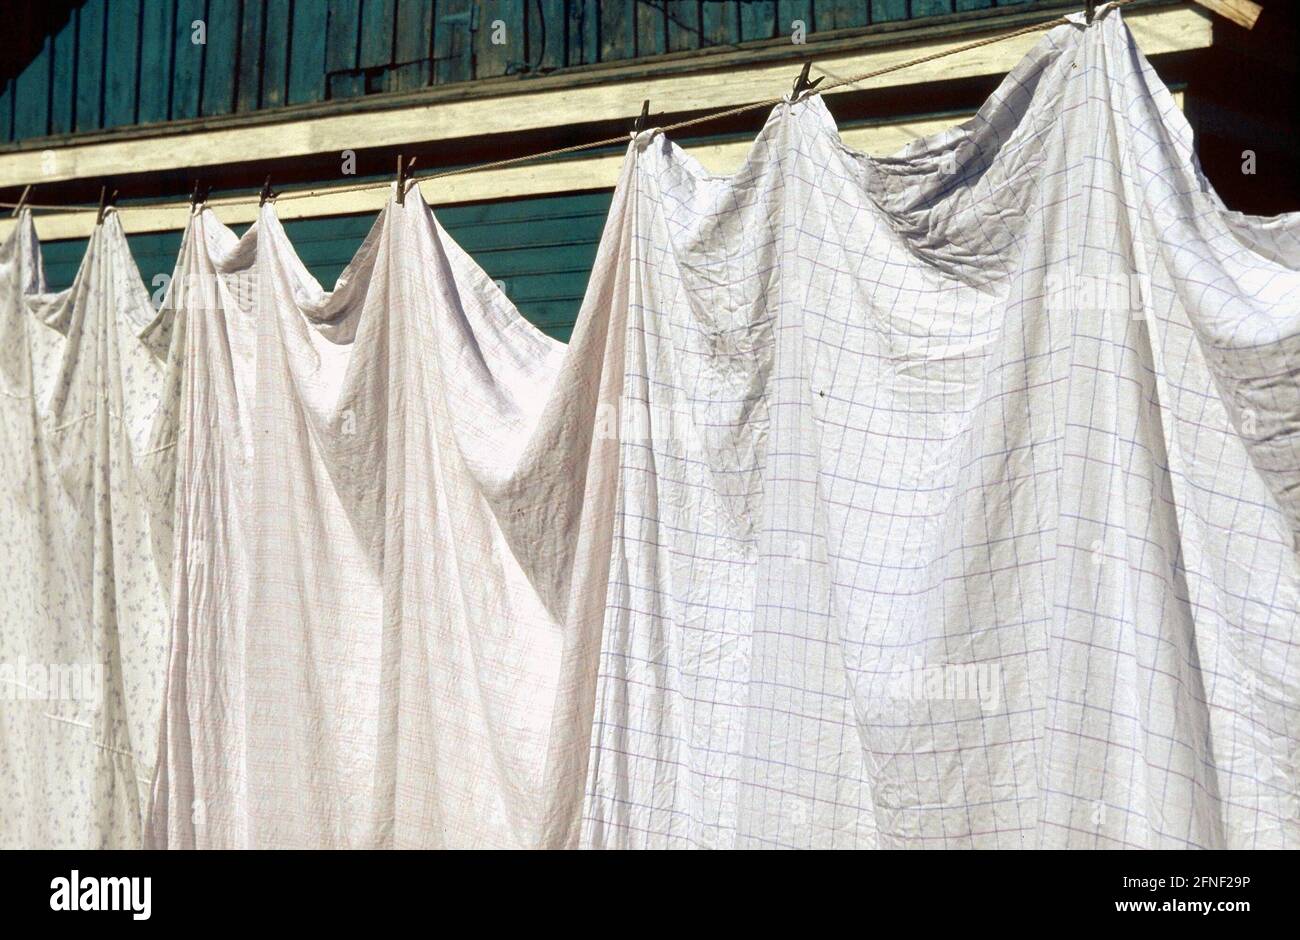 Laundry dries on the line in the German rayon Asowo near Omsk in western Siberia. In Siberia, settlements of Russian Germans (Sibiri Germans) began to appear in 1881. [automated translation] Stock Photo